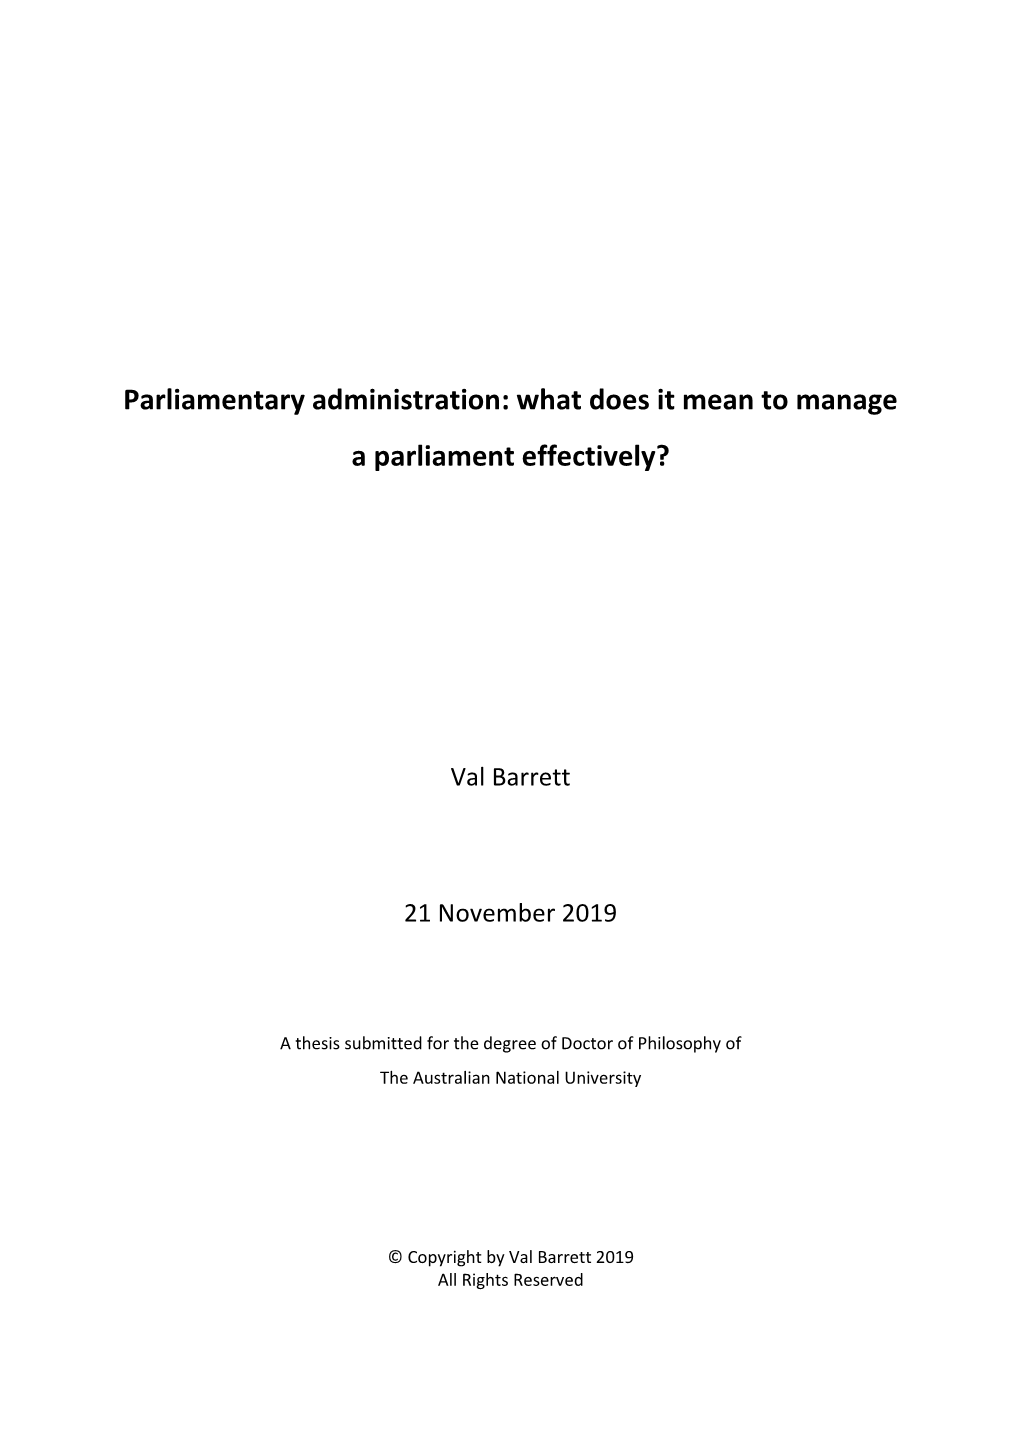 Parliamentary Administration: What Does It Mean to Manage a Parliament Effectively?